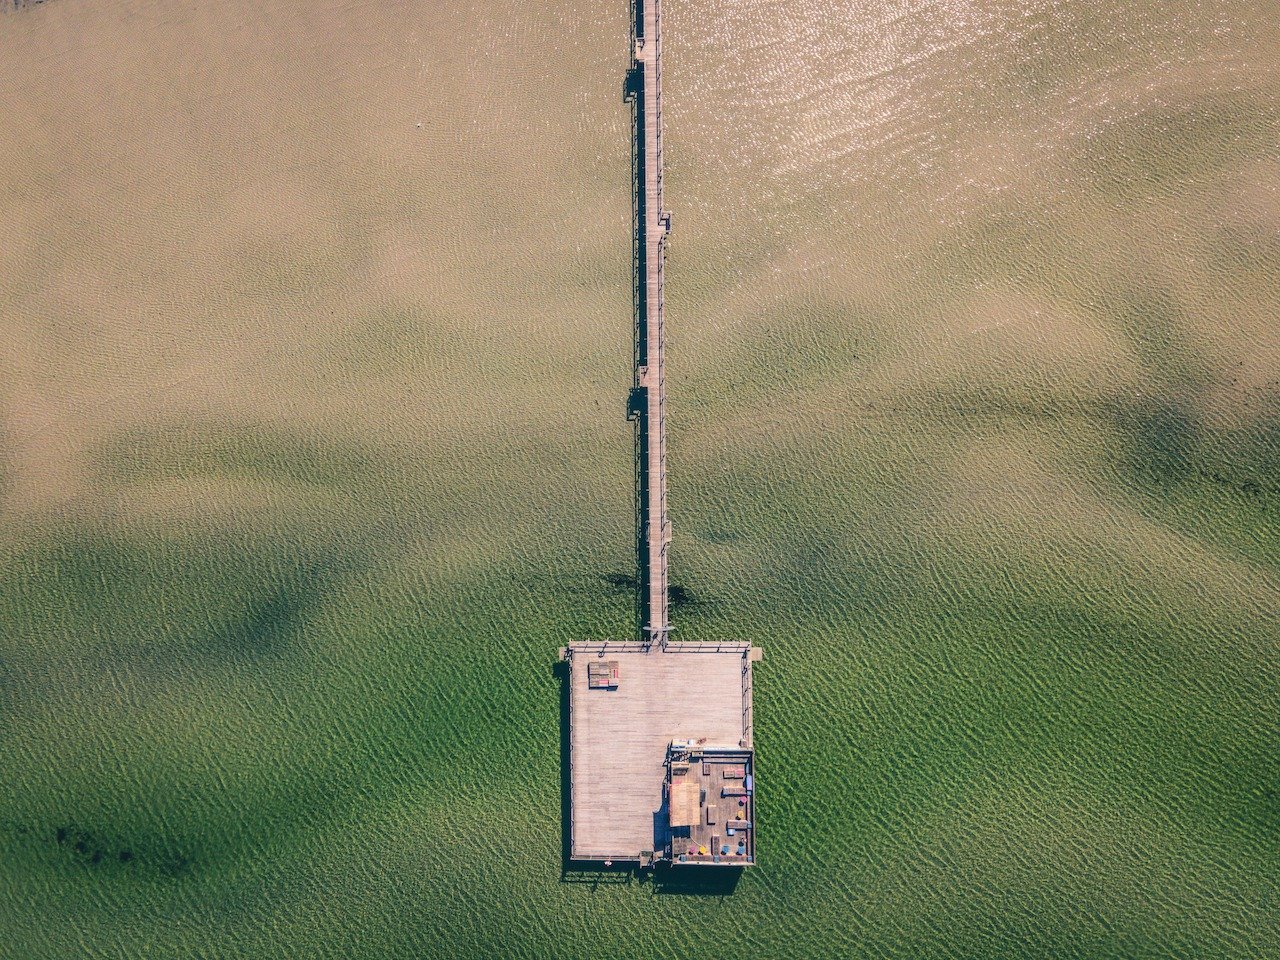 📍 &Ouml;land, Sweden

There is something awesome about seeing top down views with a drone. This is the pier at K&ouml;pingsvik Beach on the island of &Ouml;land in Sweden. Sadly the bar on the pier wasn&rsquo;t open at the time but that didn&rsquo;t